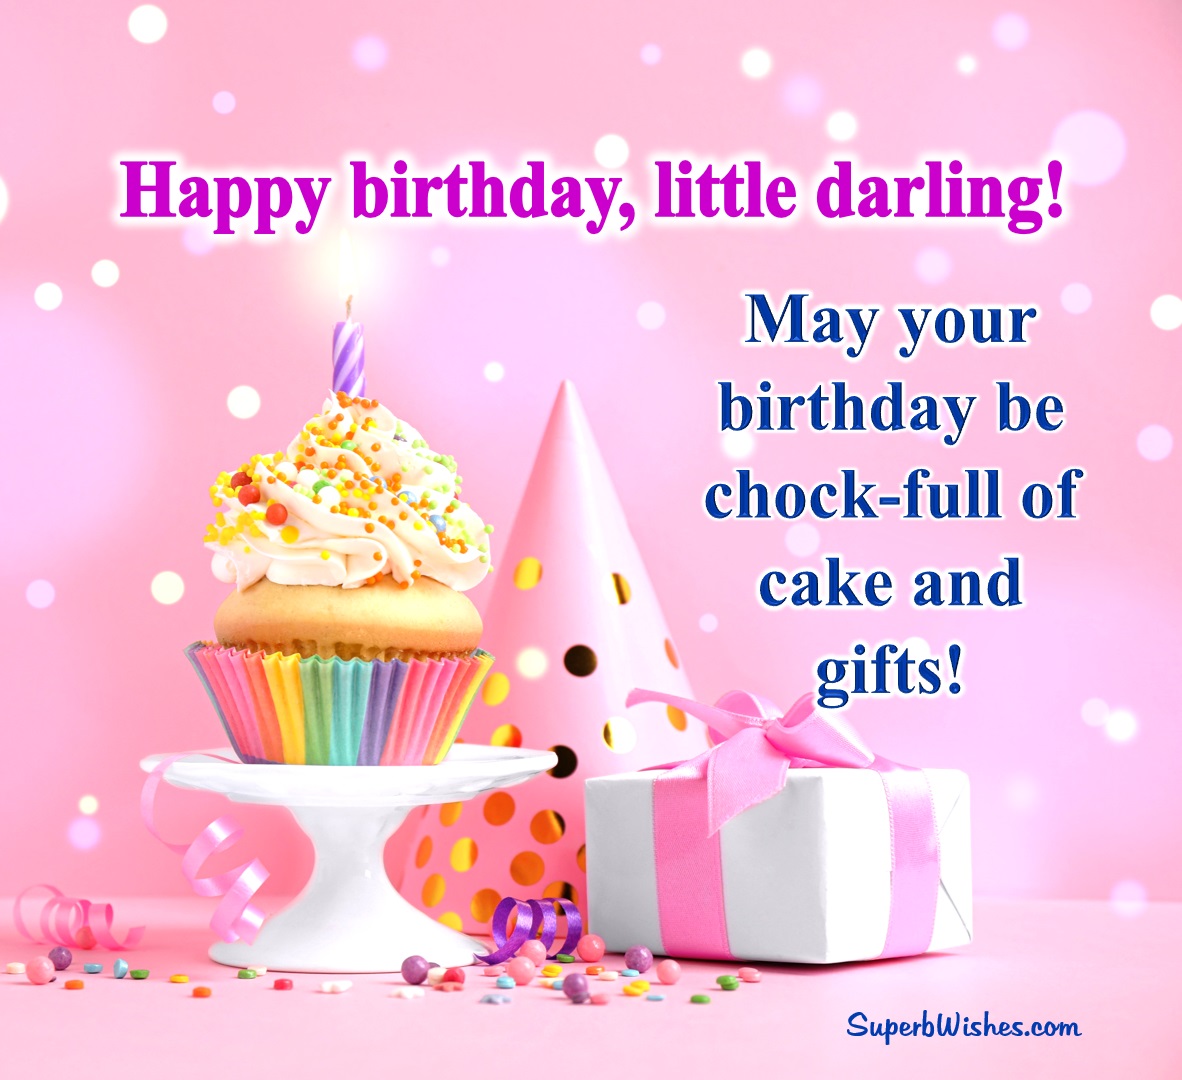 Birthday Wishes For Daughter Images - Cake And Gifts | SuperbWishes